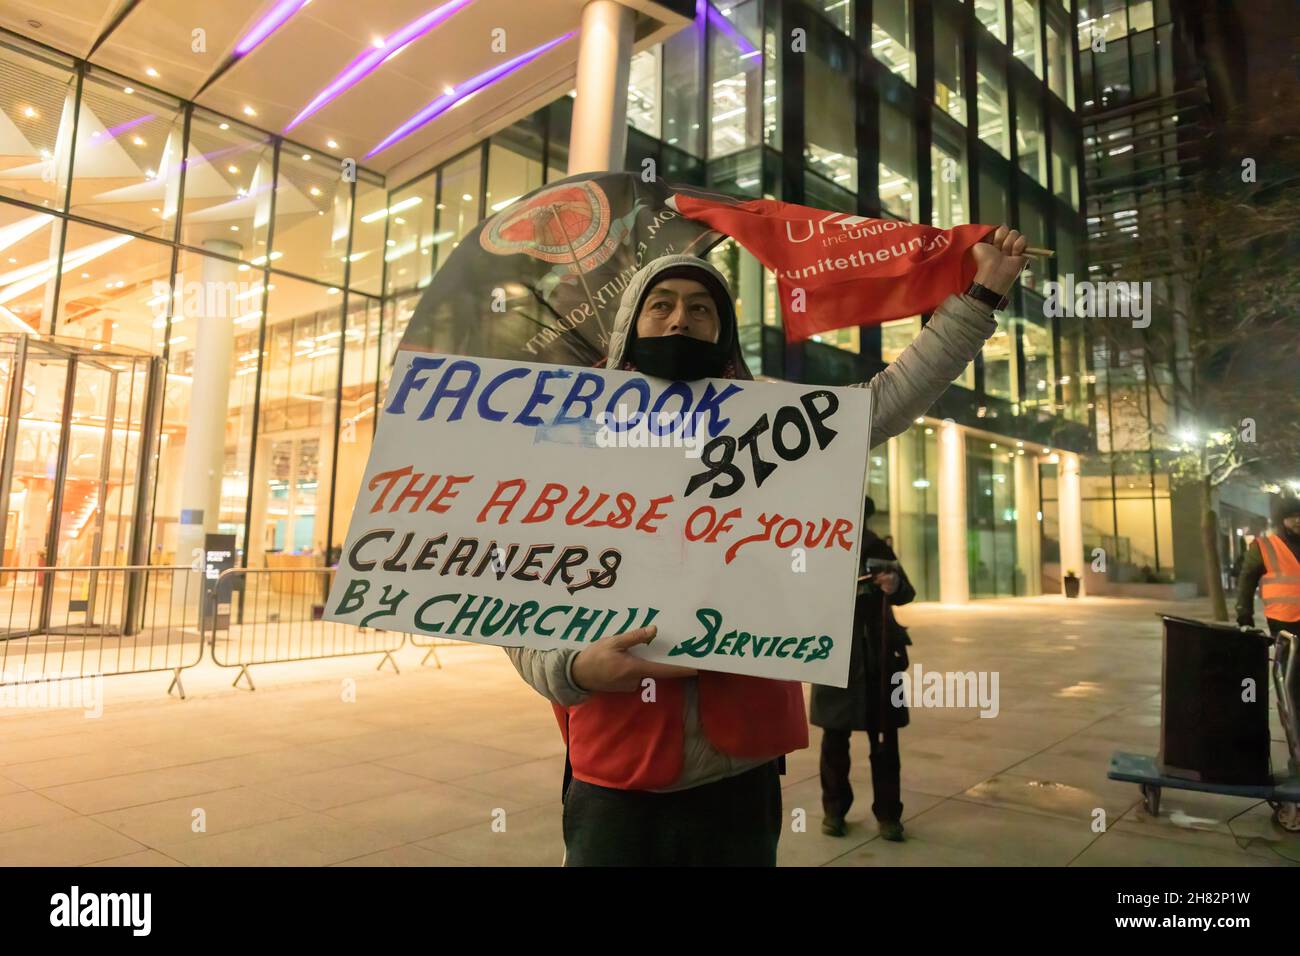 A protestor is seen holding a placard that says 'Facebook, stop the abuse of your cleaners by Churchill services' during a protest outside Facebook headquarters at Warren Street in London.The group of protesters led by the Independent Workers Union protested at the Facebook London office after it increased workload without a salary increase. Jones Lang LaSalle (JLL) has outsourced the cleaning obligations to Churchill Services to clean the office of Facebook. Also, they allegedly mistreated the cleaners which resulted in the protest. Stock Photo